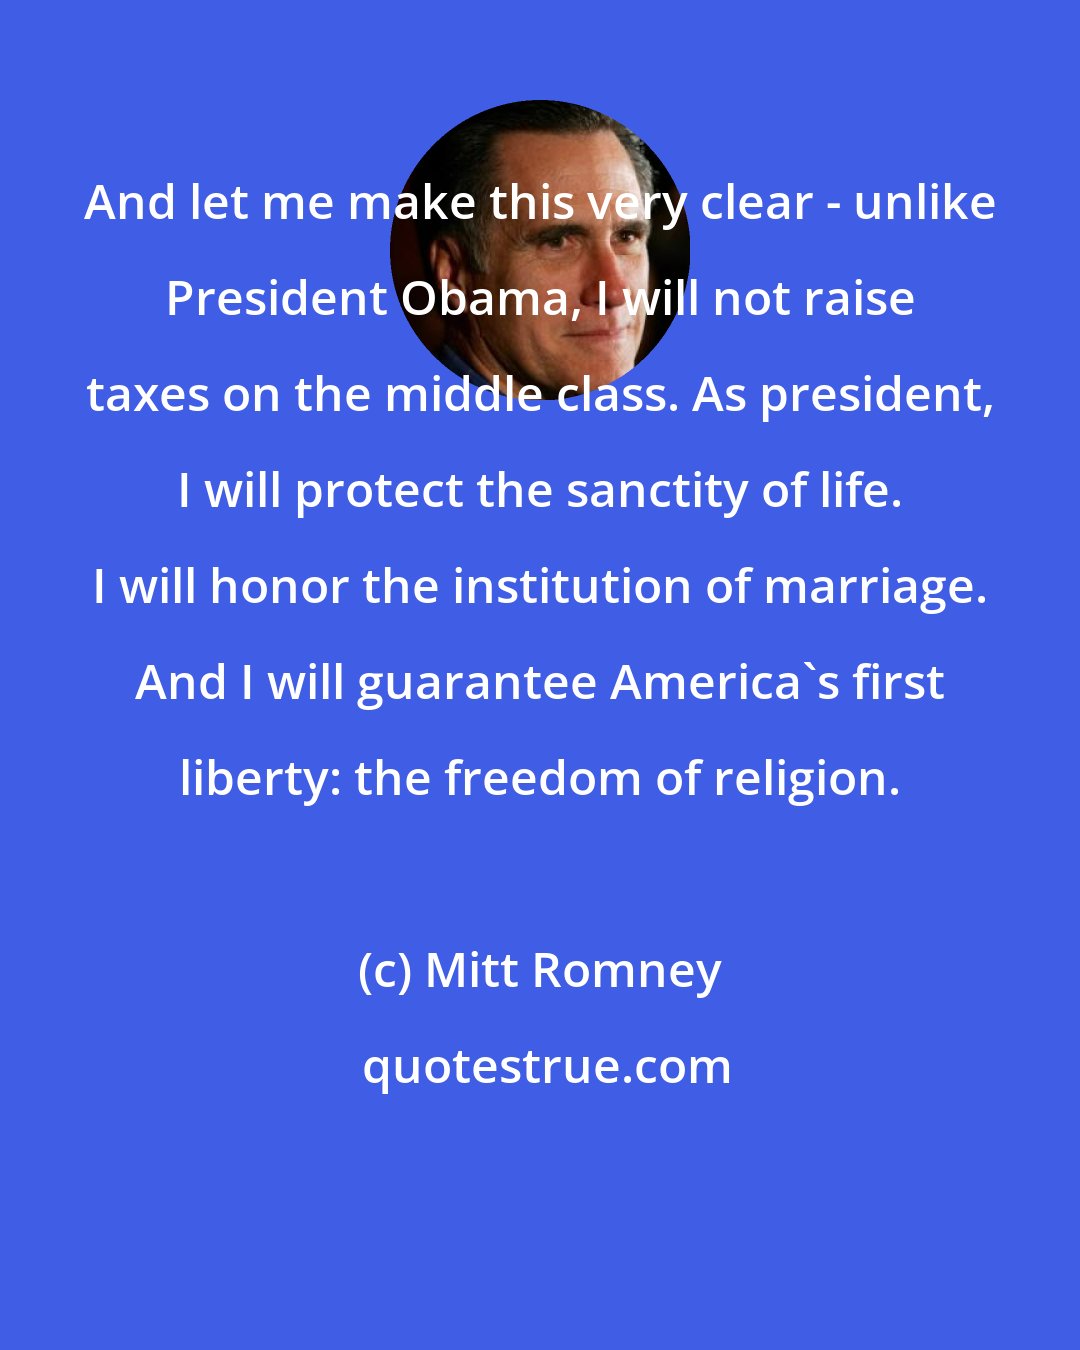 Mitt Romney: And let me make this very clear - unlike President Obama, I will not raise taxes on the middle class. As president, I will protect the sanctity of life. I will honor the institution of marriage. And I will guarantee America's first liberty: the freedom of religion.